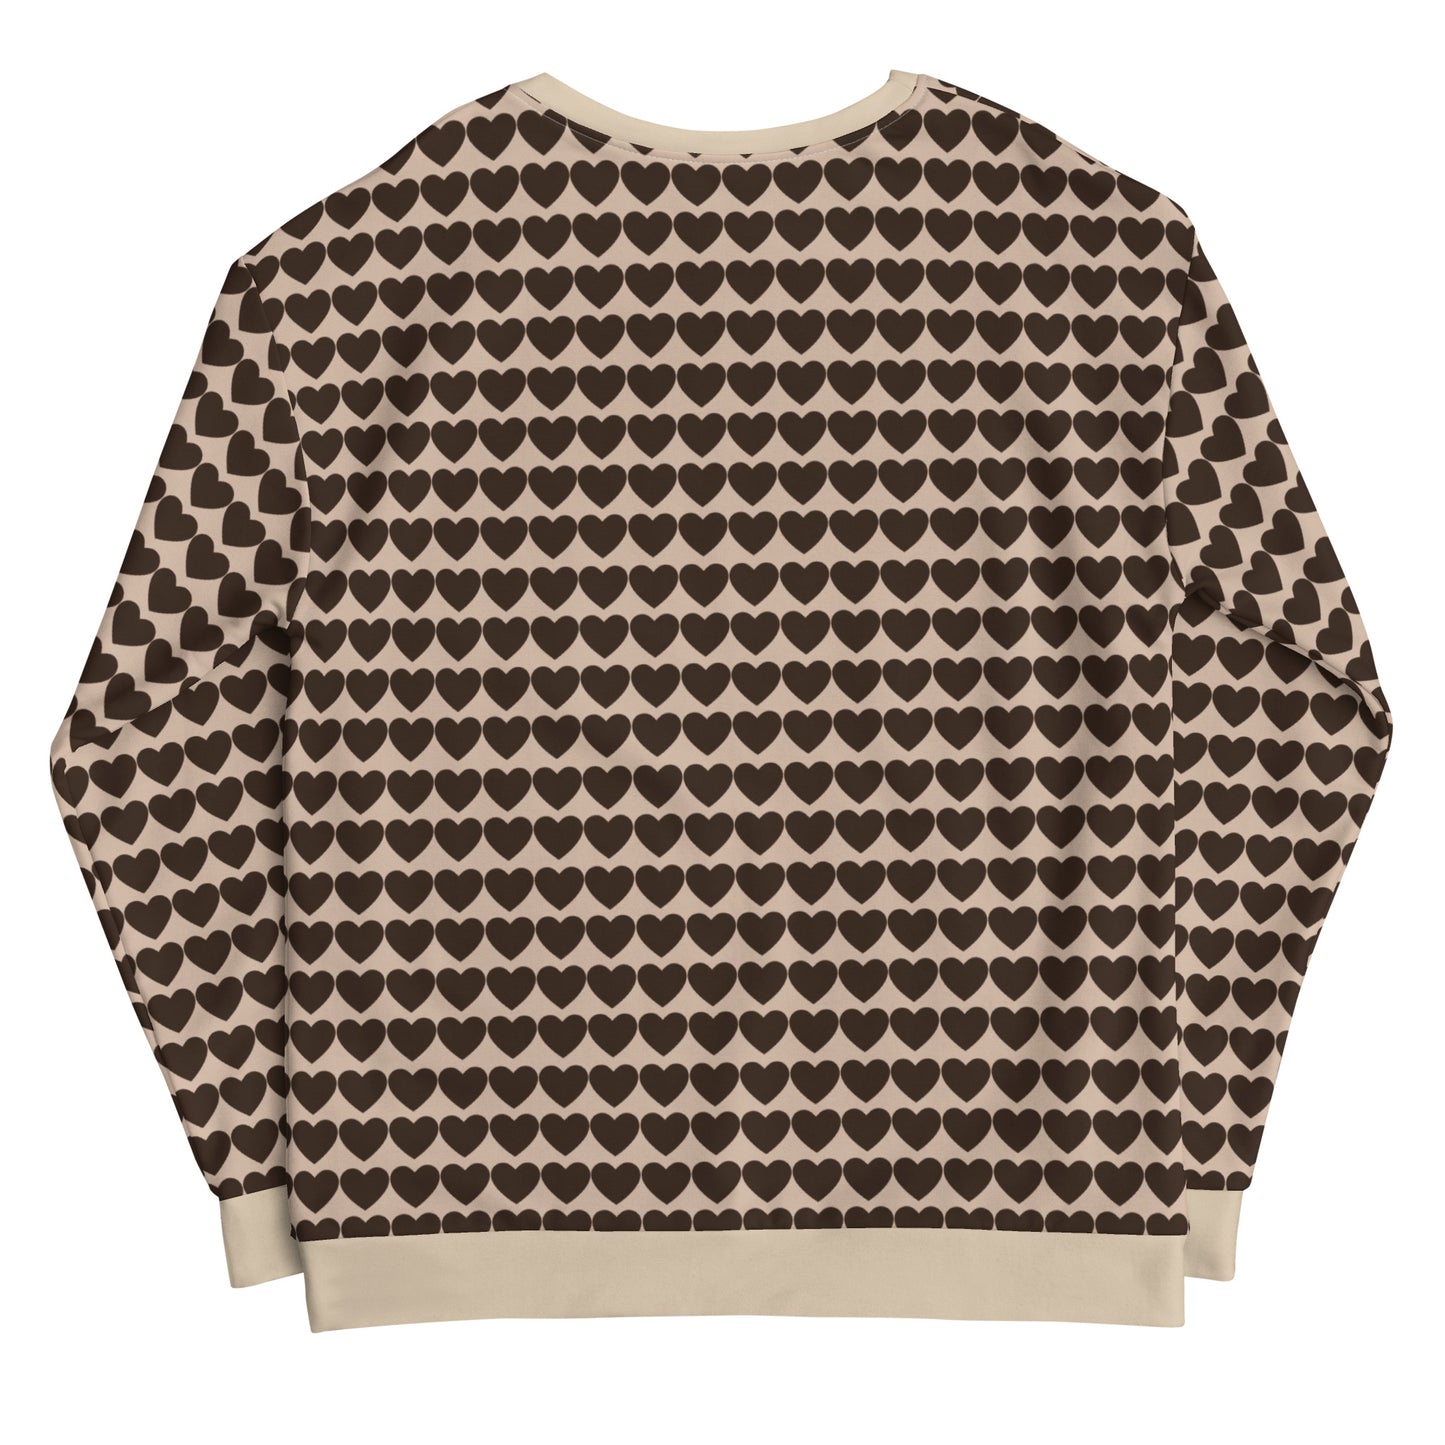 Heart Pattern - Inspired By Harry Styles - Sustainably Made Sweatshirt